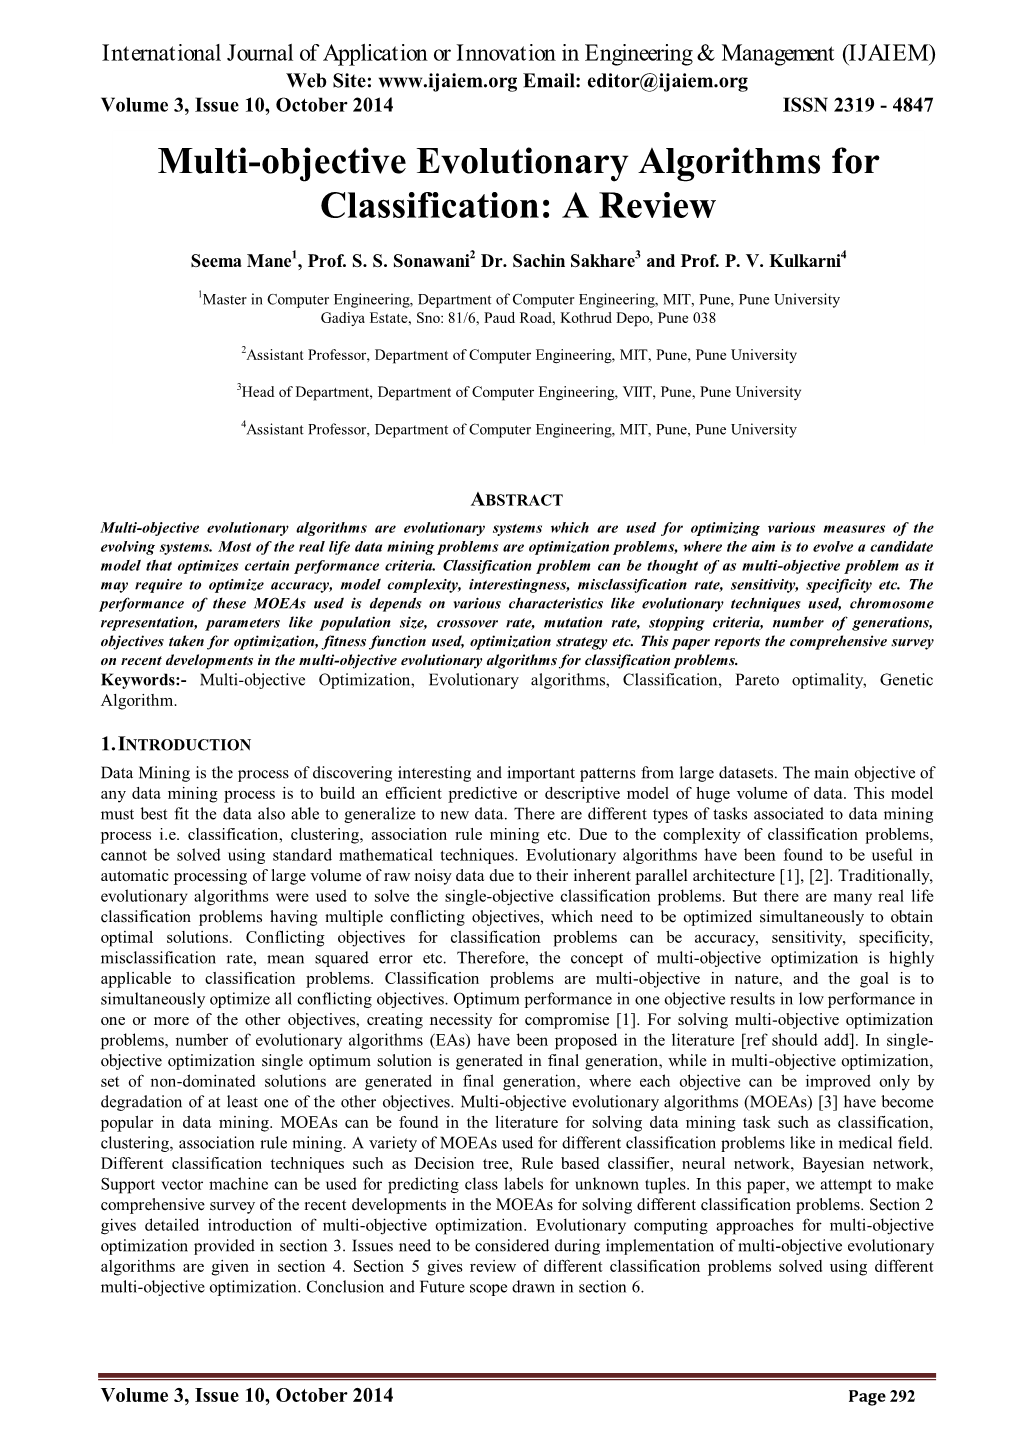 Multi-Objective Evolutionary Algorithms for Classification: a Review